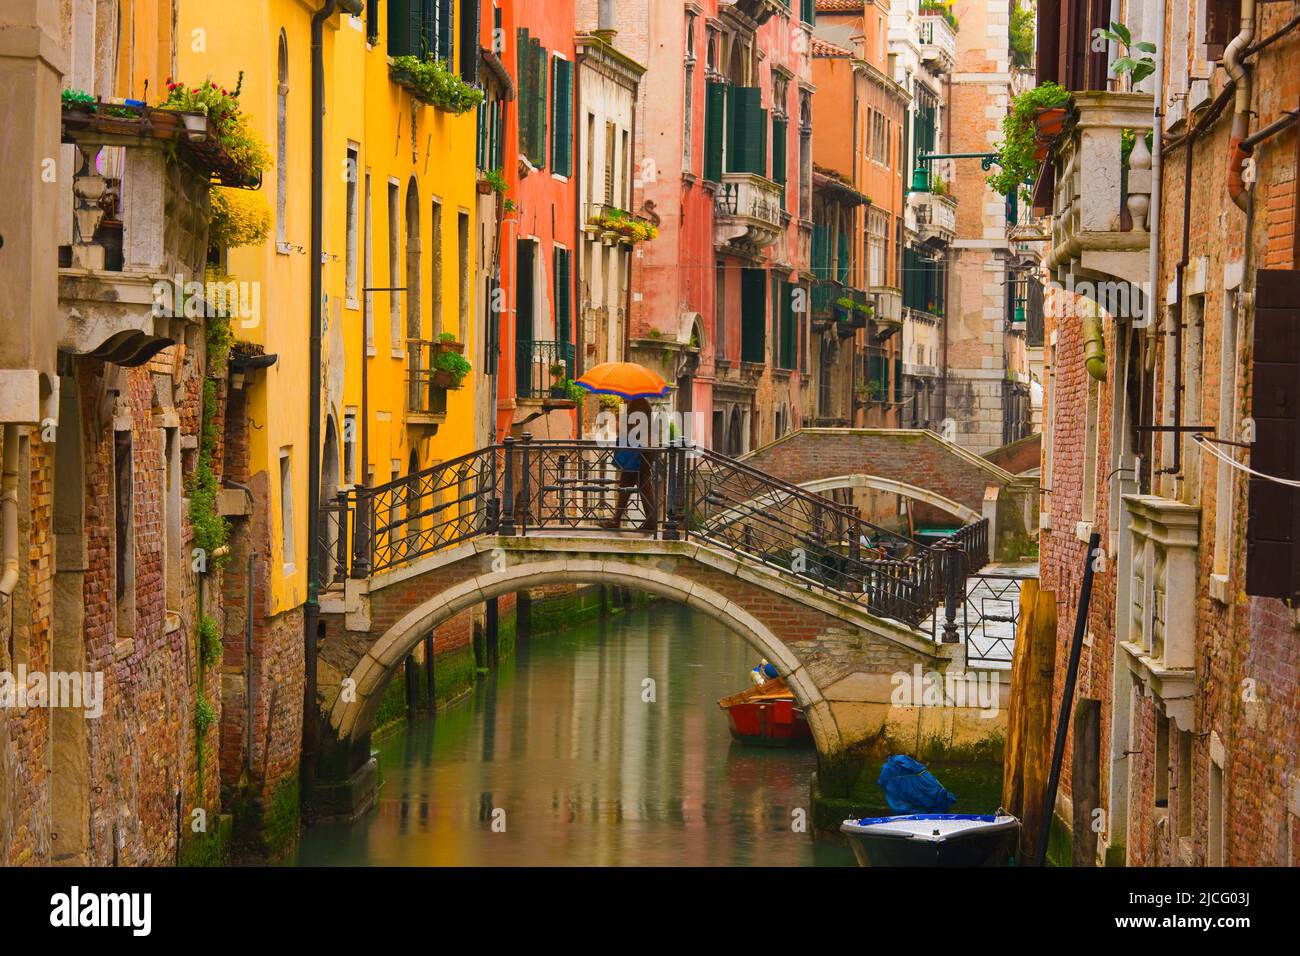 Person with umbrella walking on Bridge over Canal, Venice, Italy Stock Photo